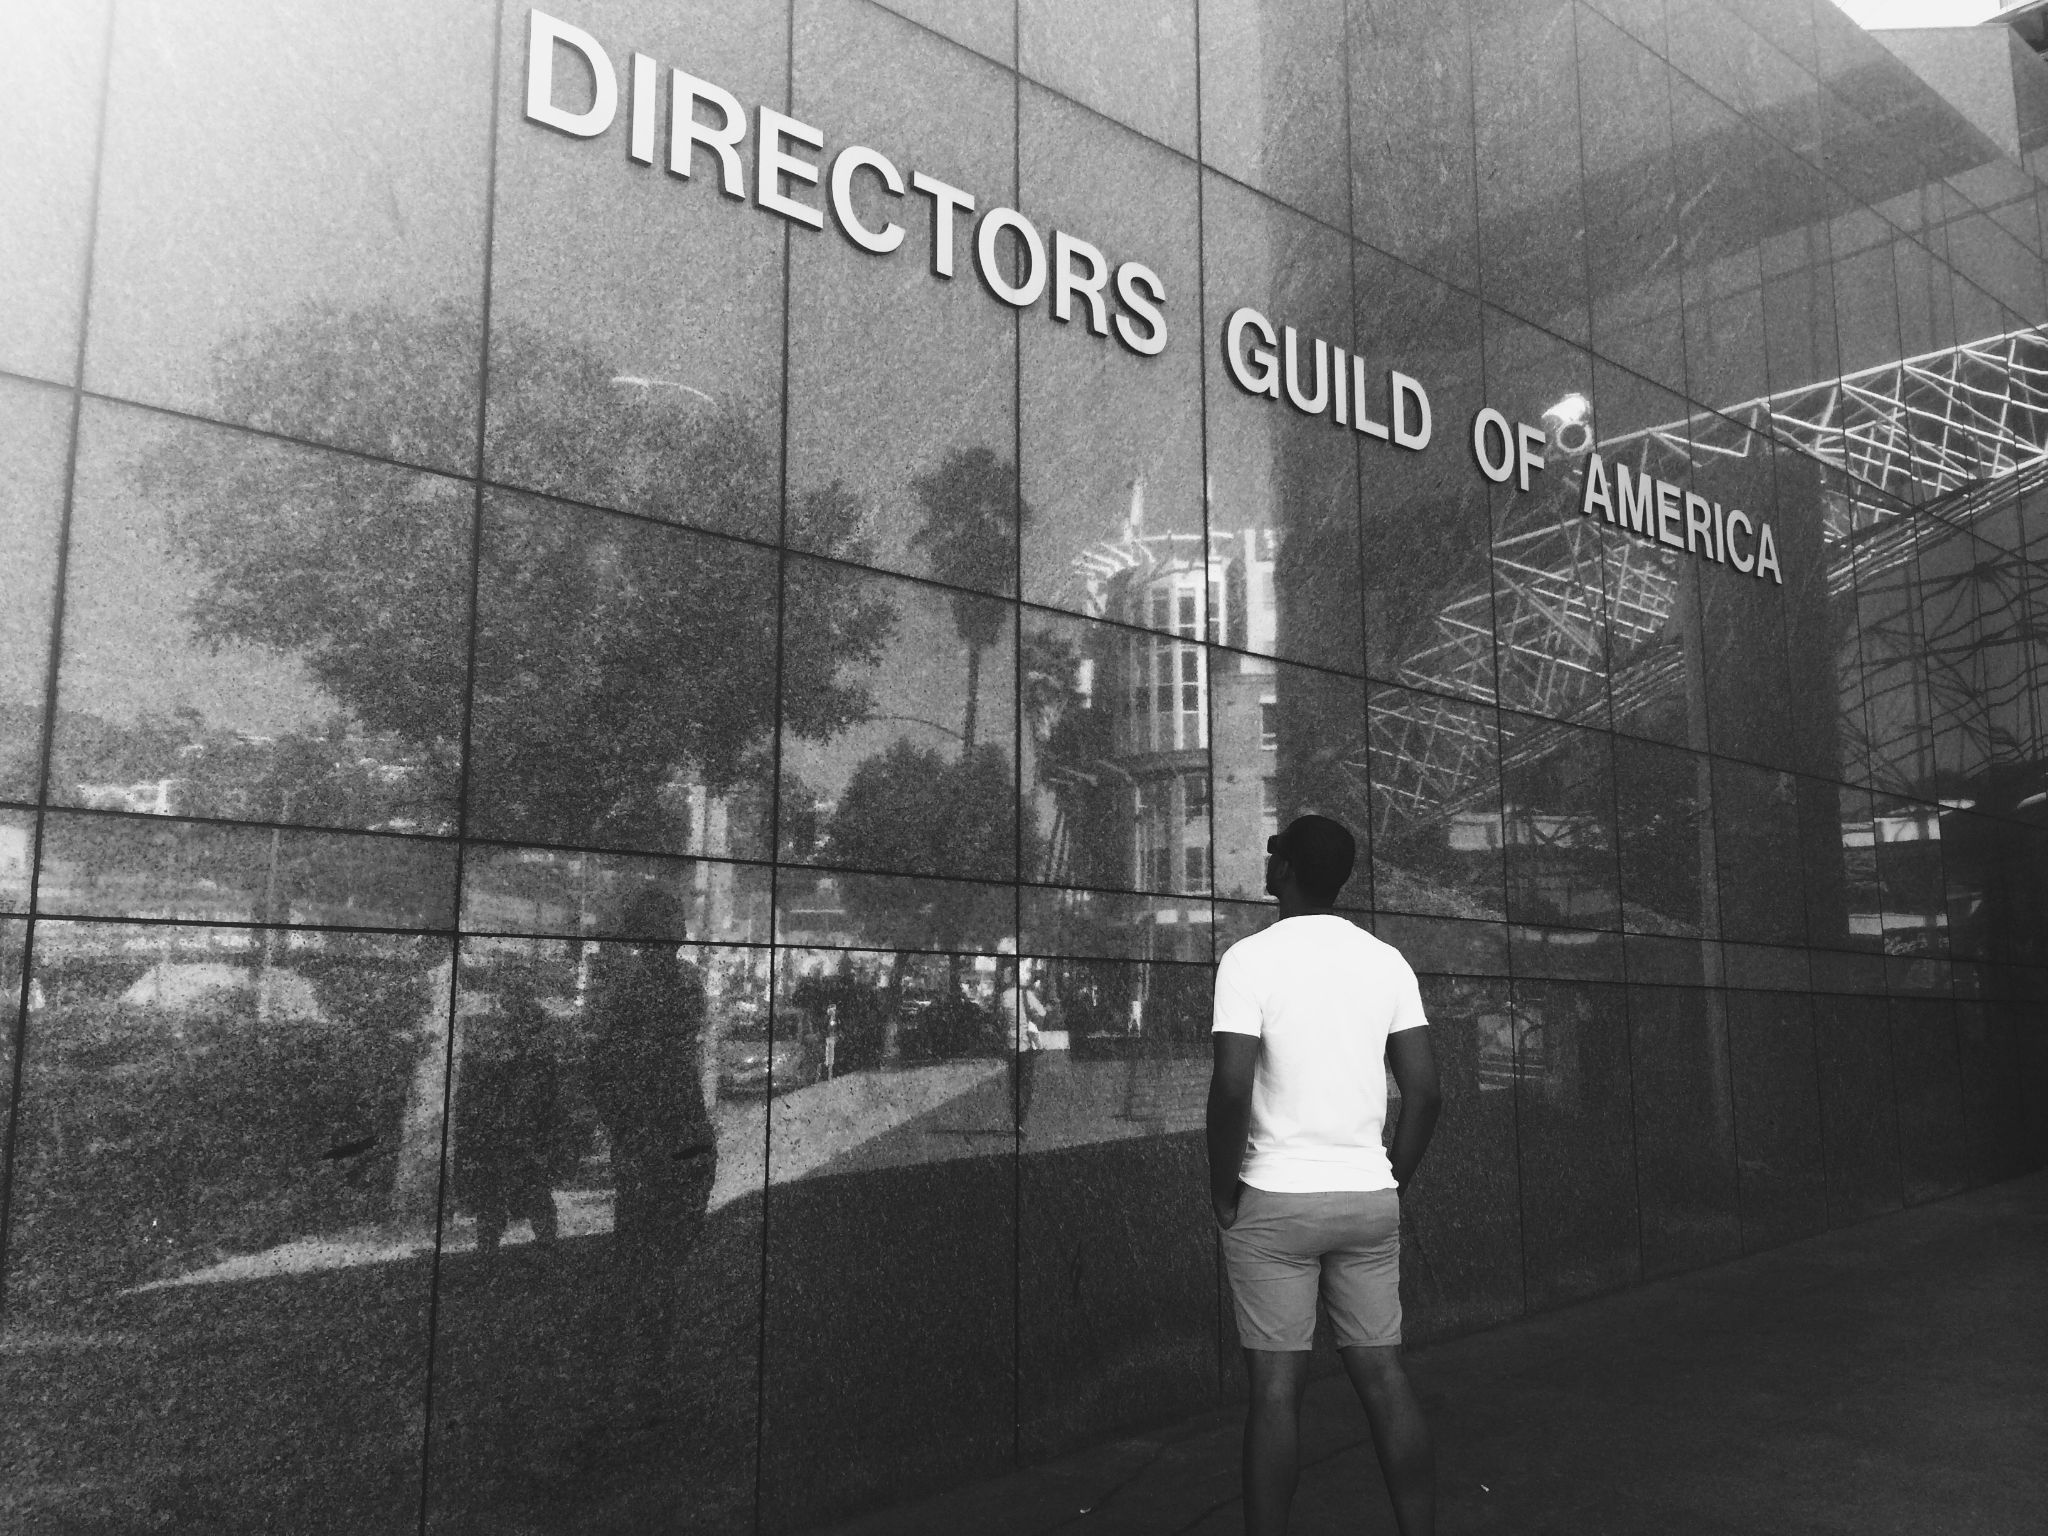 Black and white of Joshua Otis Miller Chief Executive Officer in front of Director's Guild of America building in LA